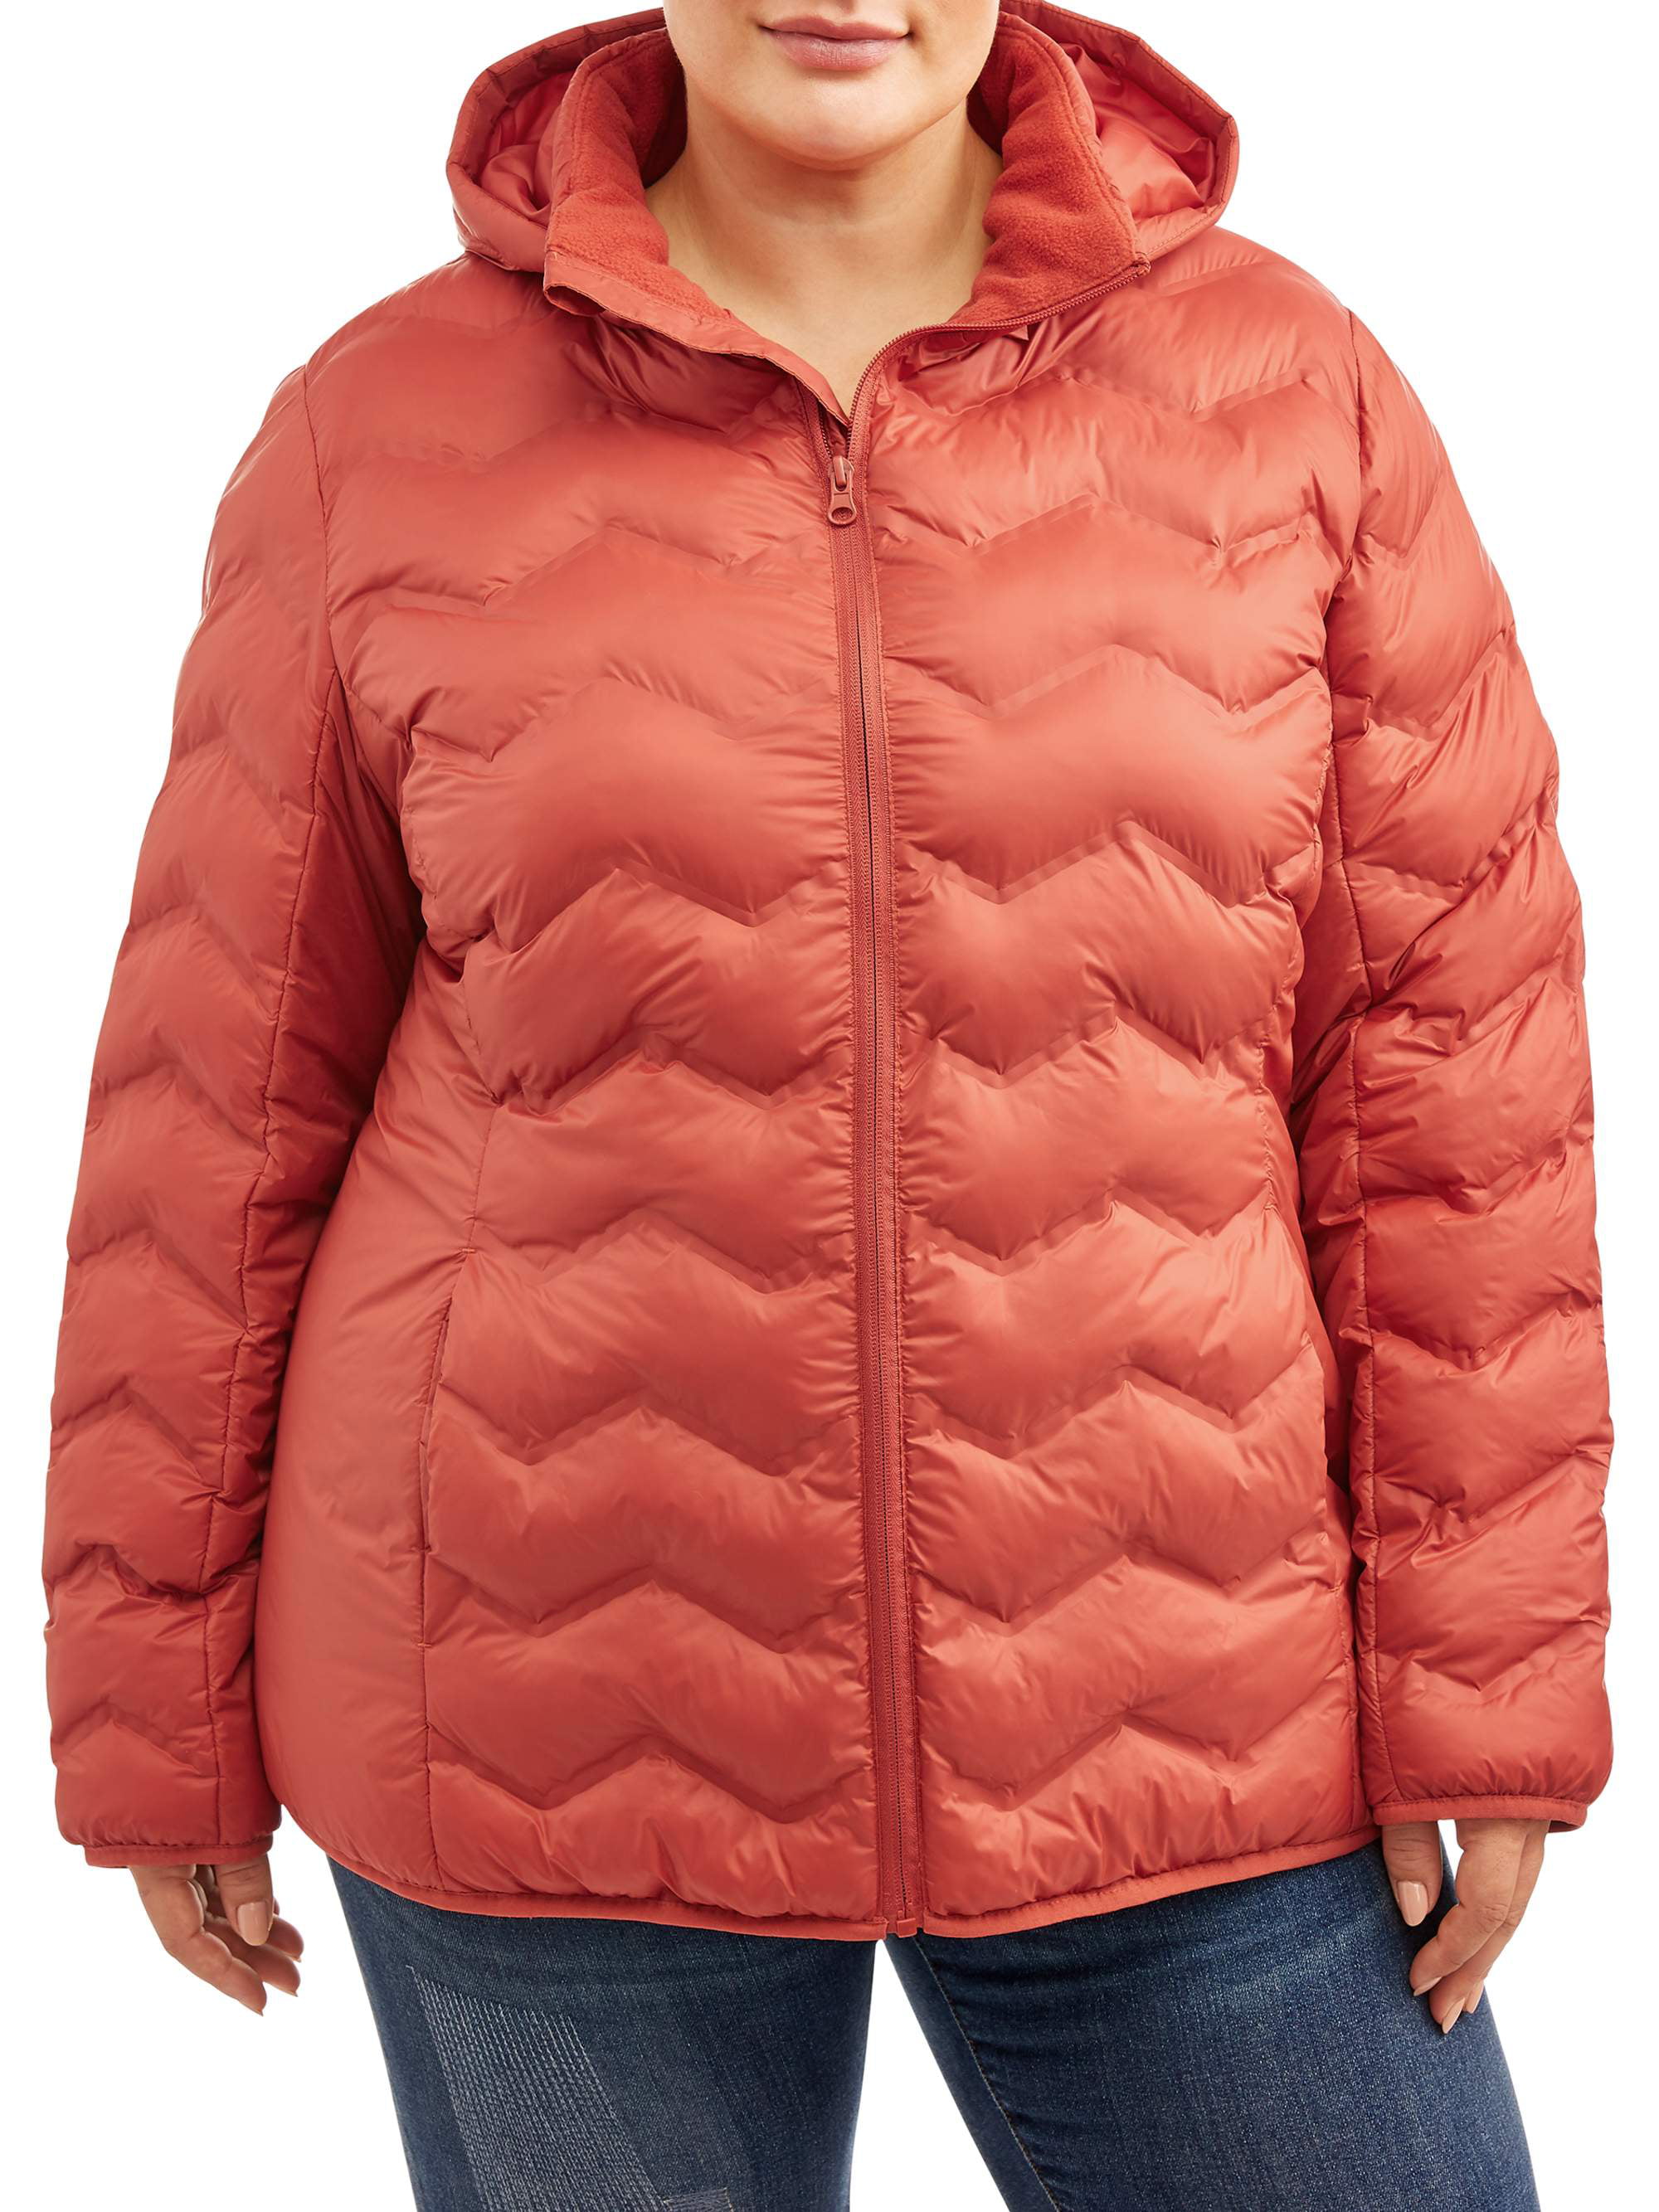 Plus Size Puffer Coat with Hood 